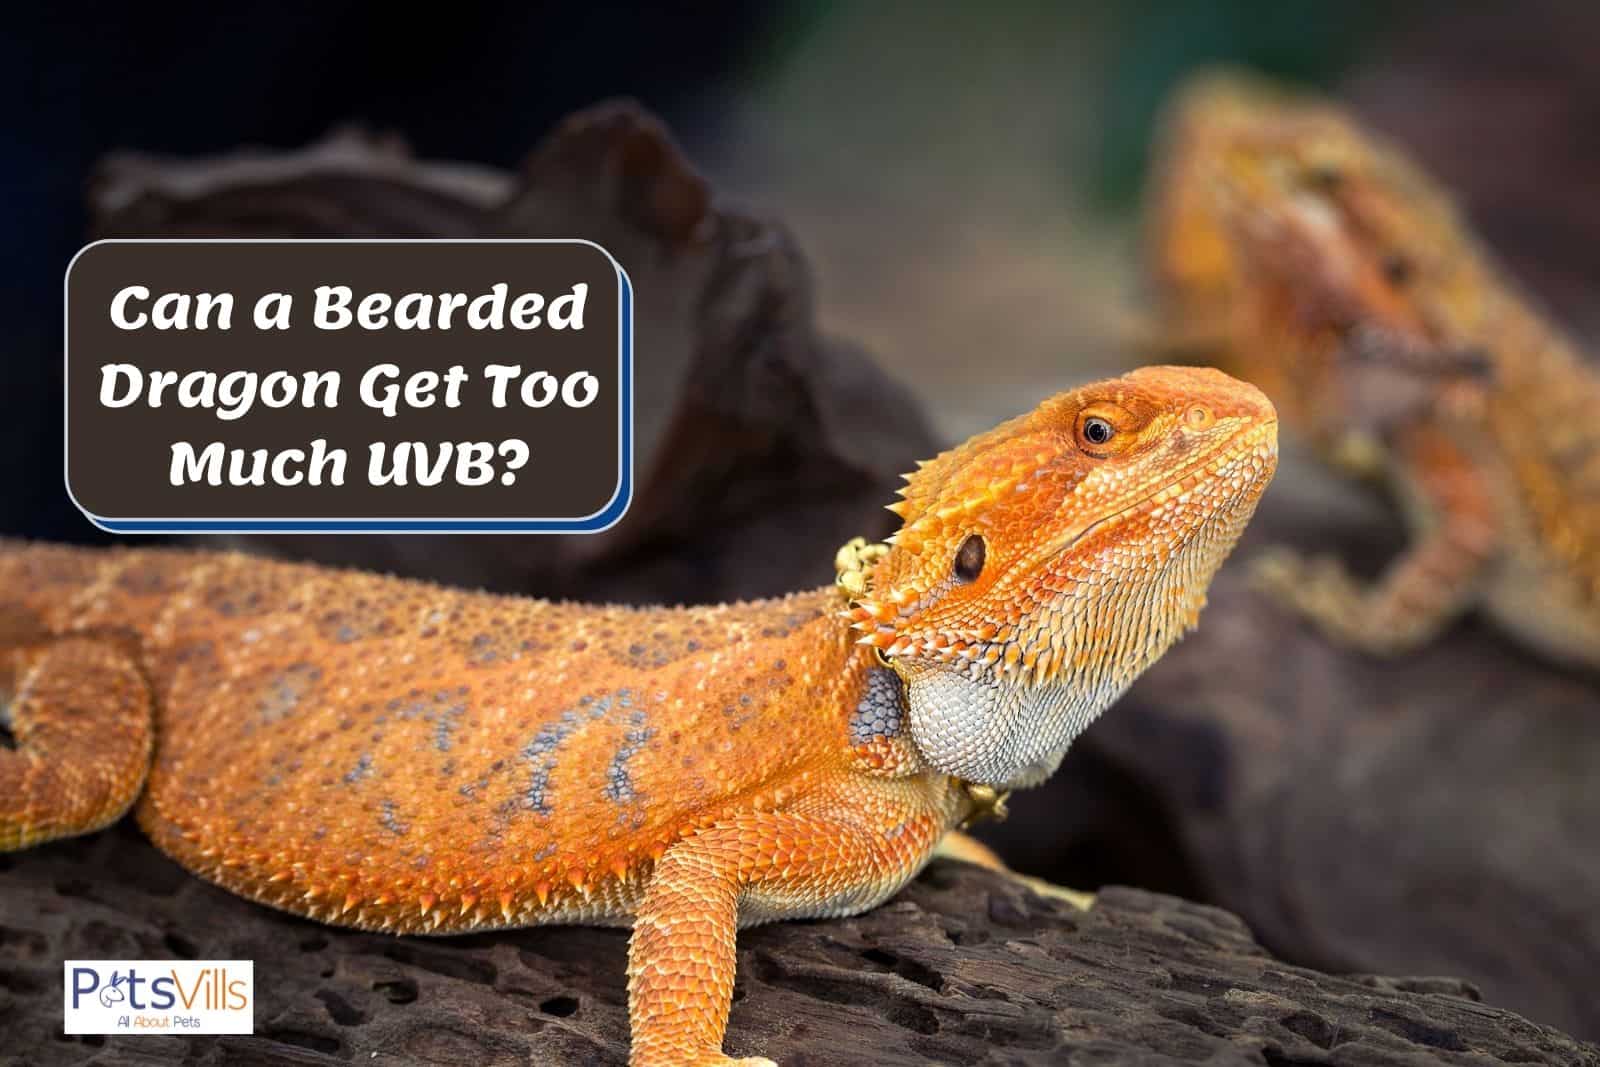 bright orange beardie in a dark cage; can a bearded dragon get too much uvb?